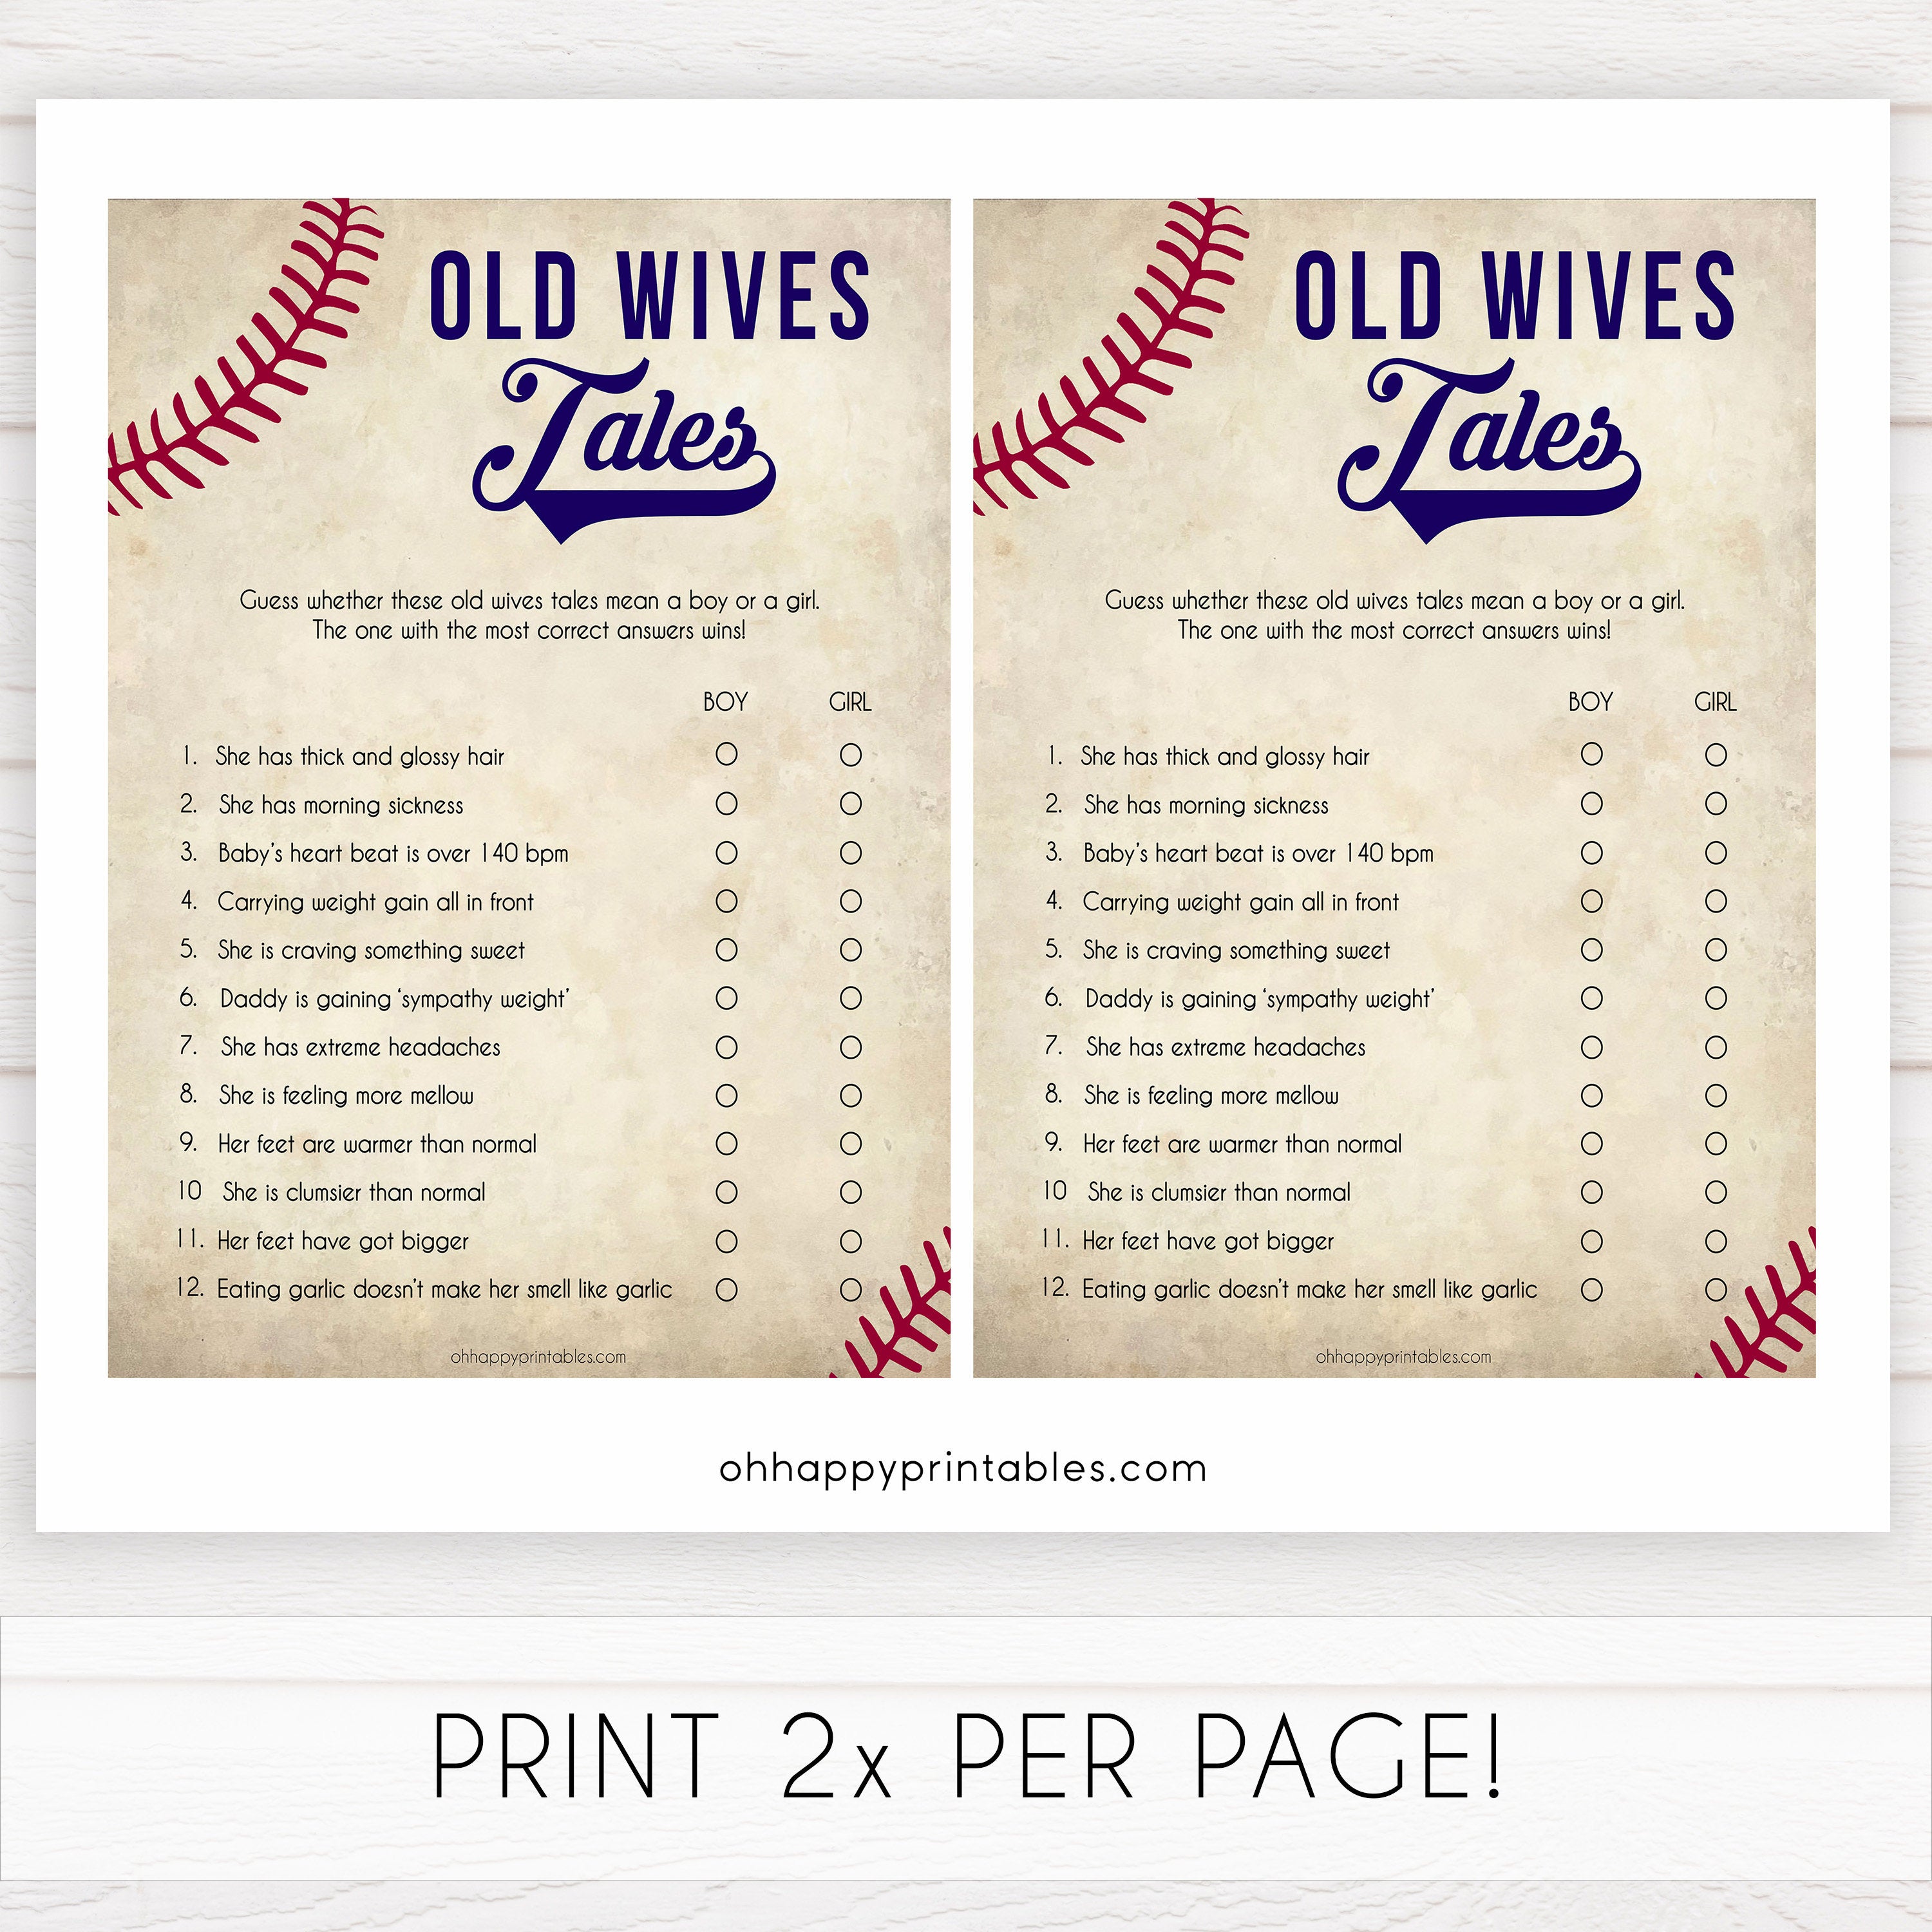 Old wives tales baby games, Baseball baby shower games, printable baby shower games, fun baby shower games, top baby shower ideas, little slugger baby games